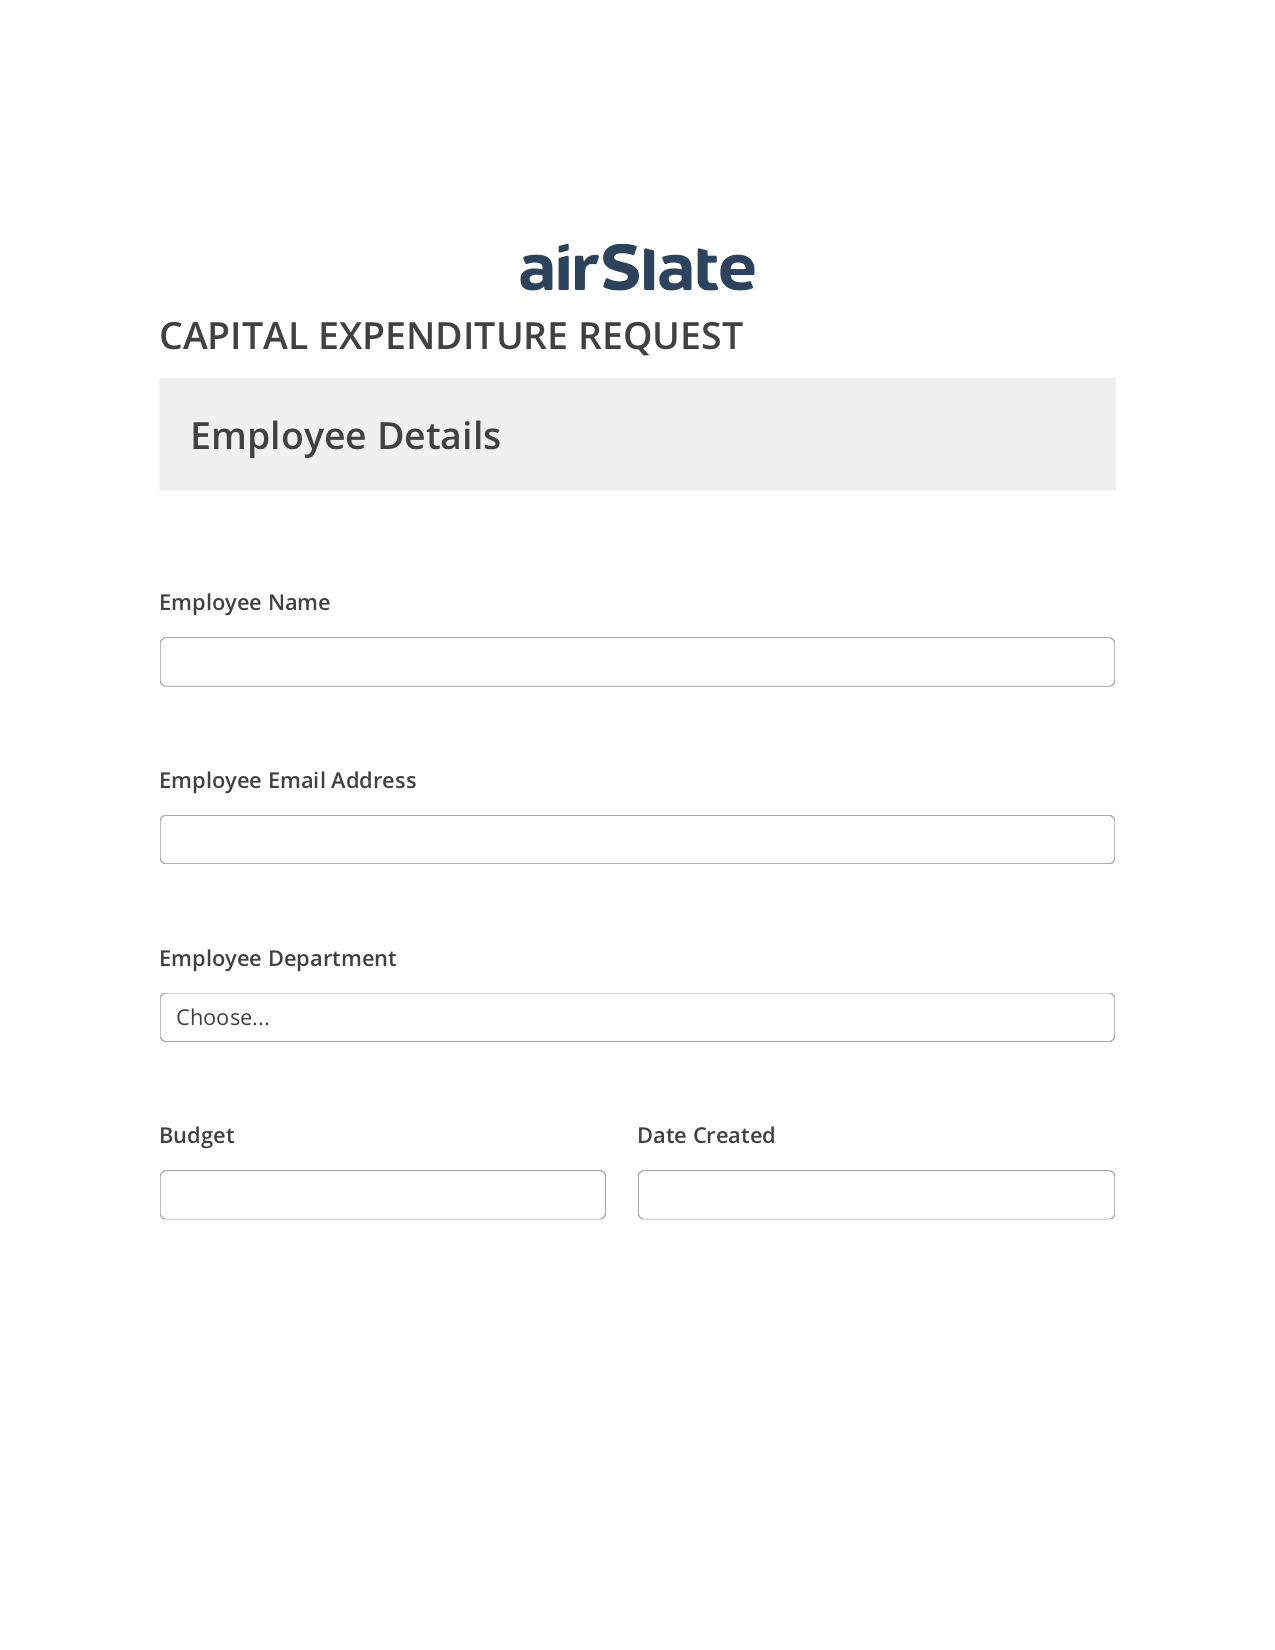 Capital Expenditure Request Approval Workflow Pre-fill from Excel Spreadsheet Dropdown Options Bot, Remove Tags From Slate Bot, Archive to Box Bot